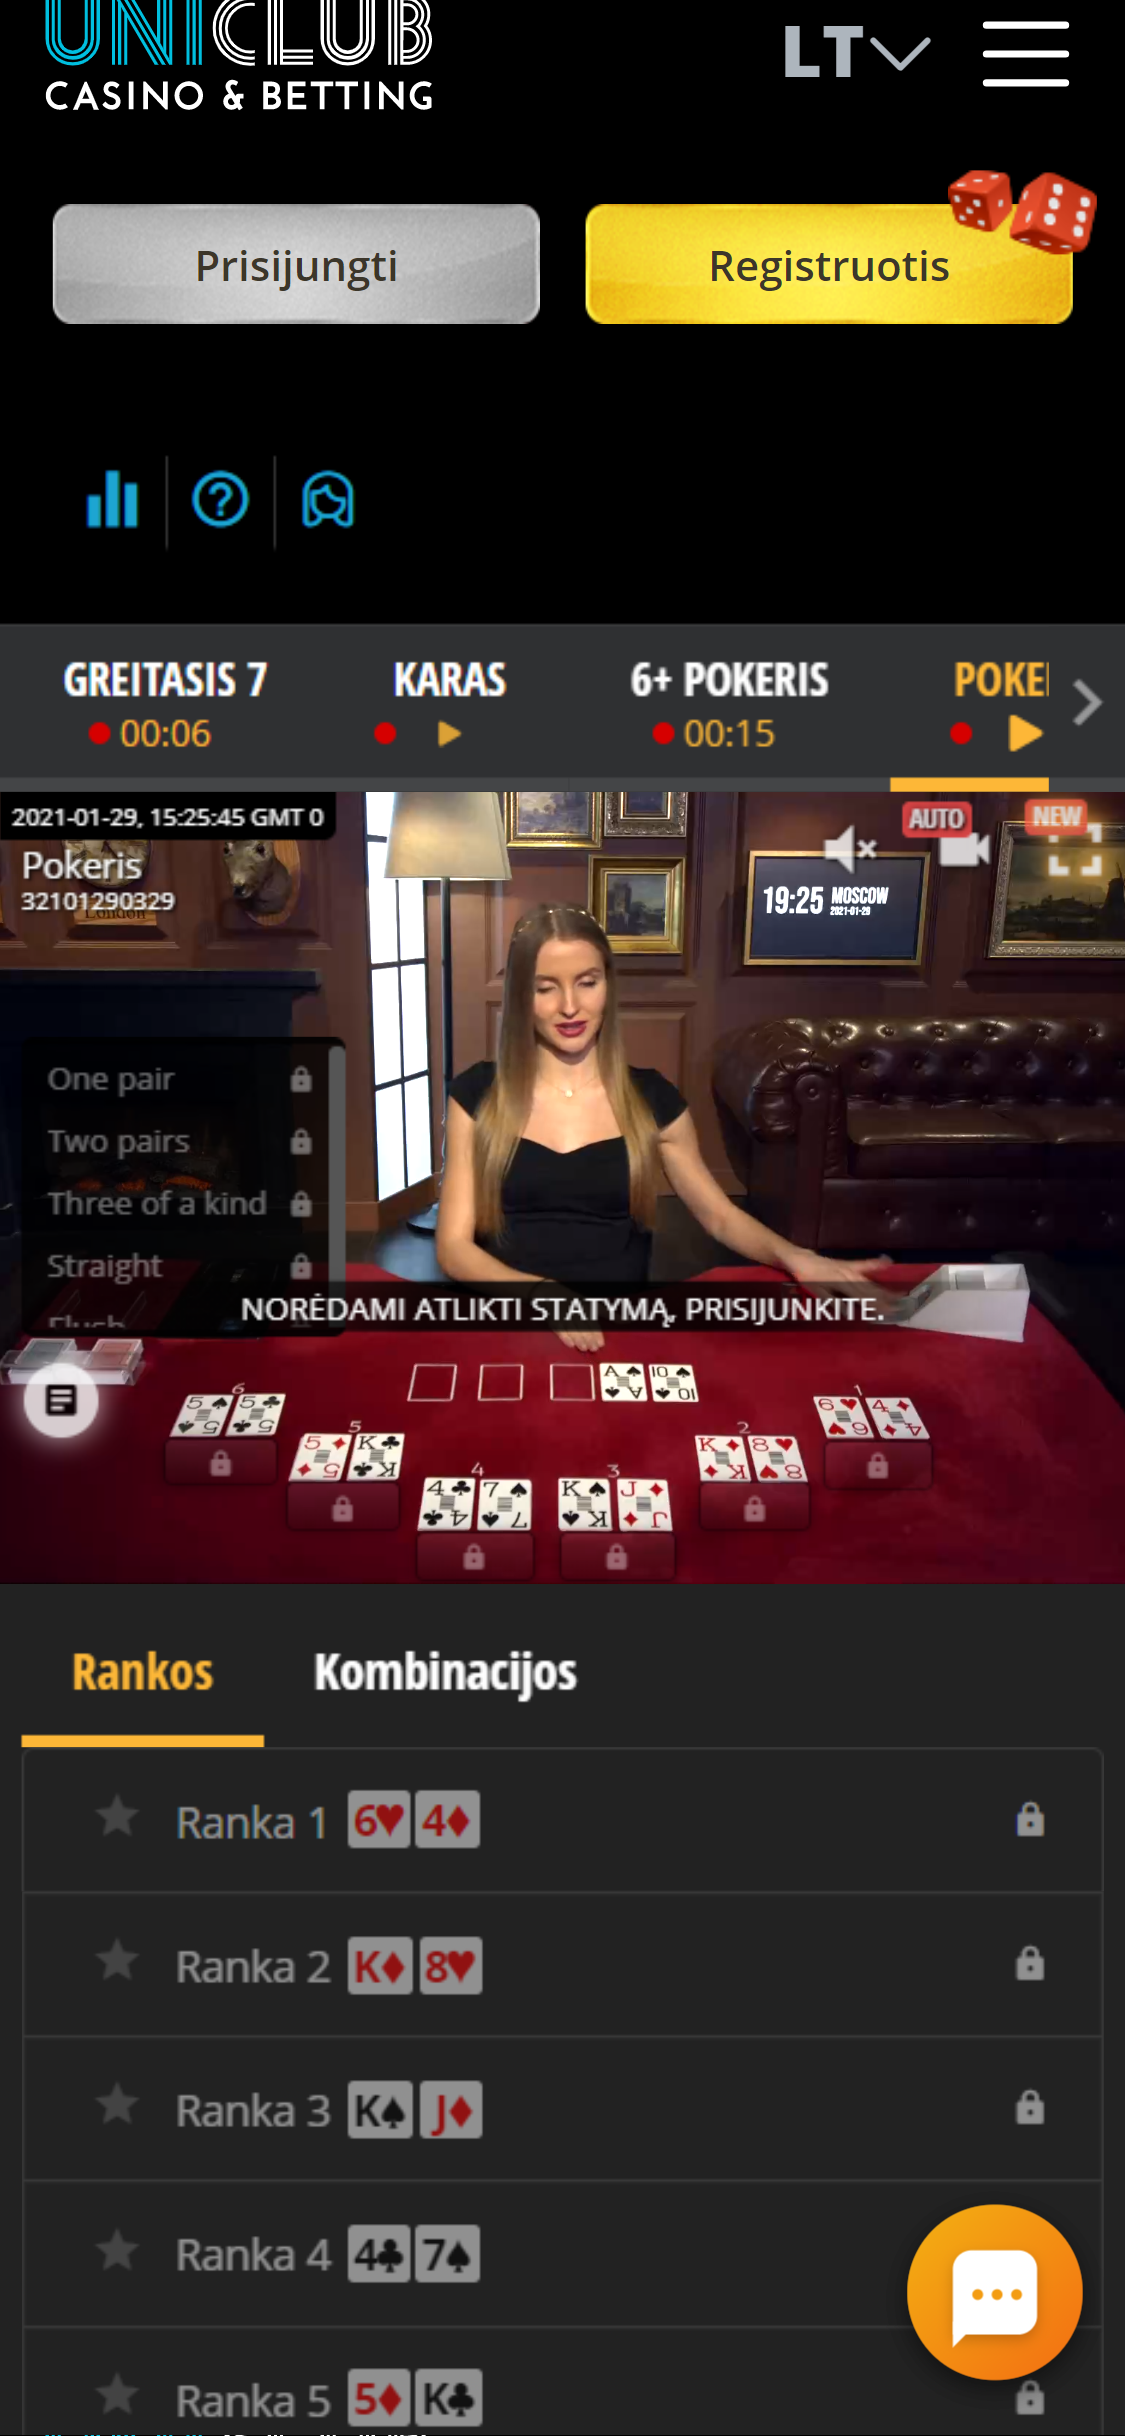 Uniclub Casino Mobile Live Dealer Games Review